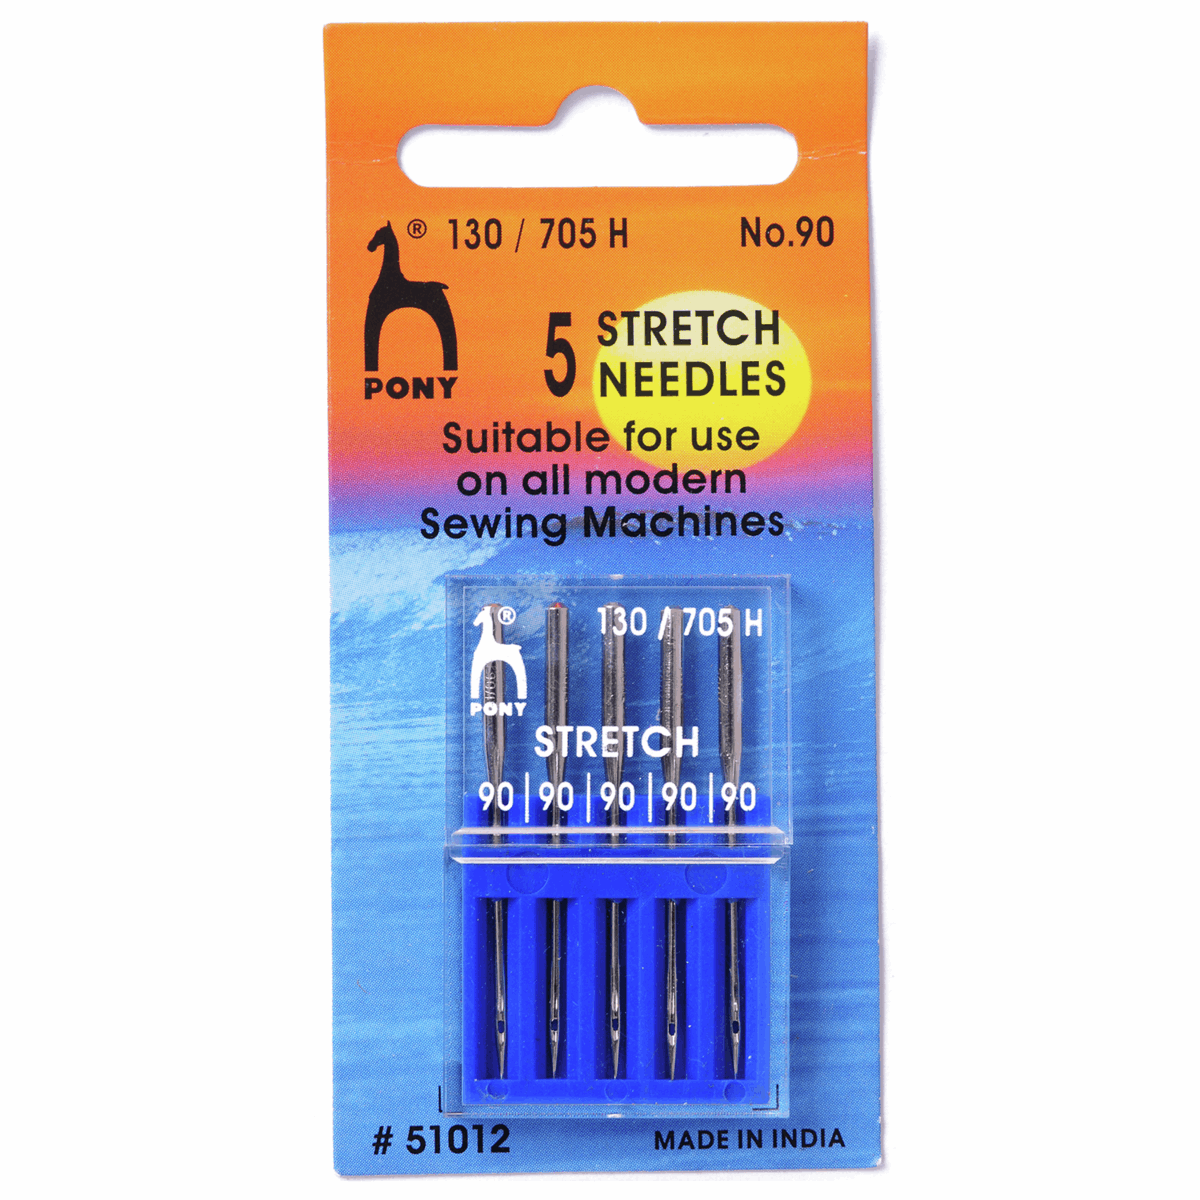 PONY Stretch Sewing Machine Needles - 5 pack